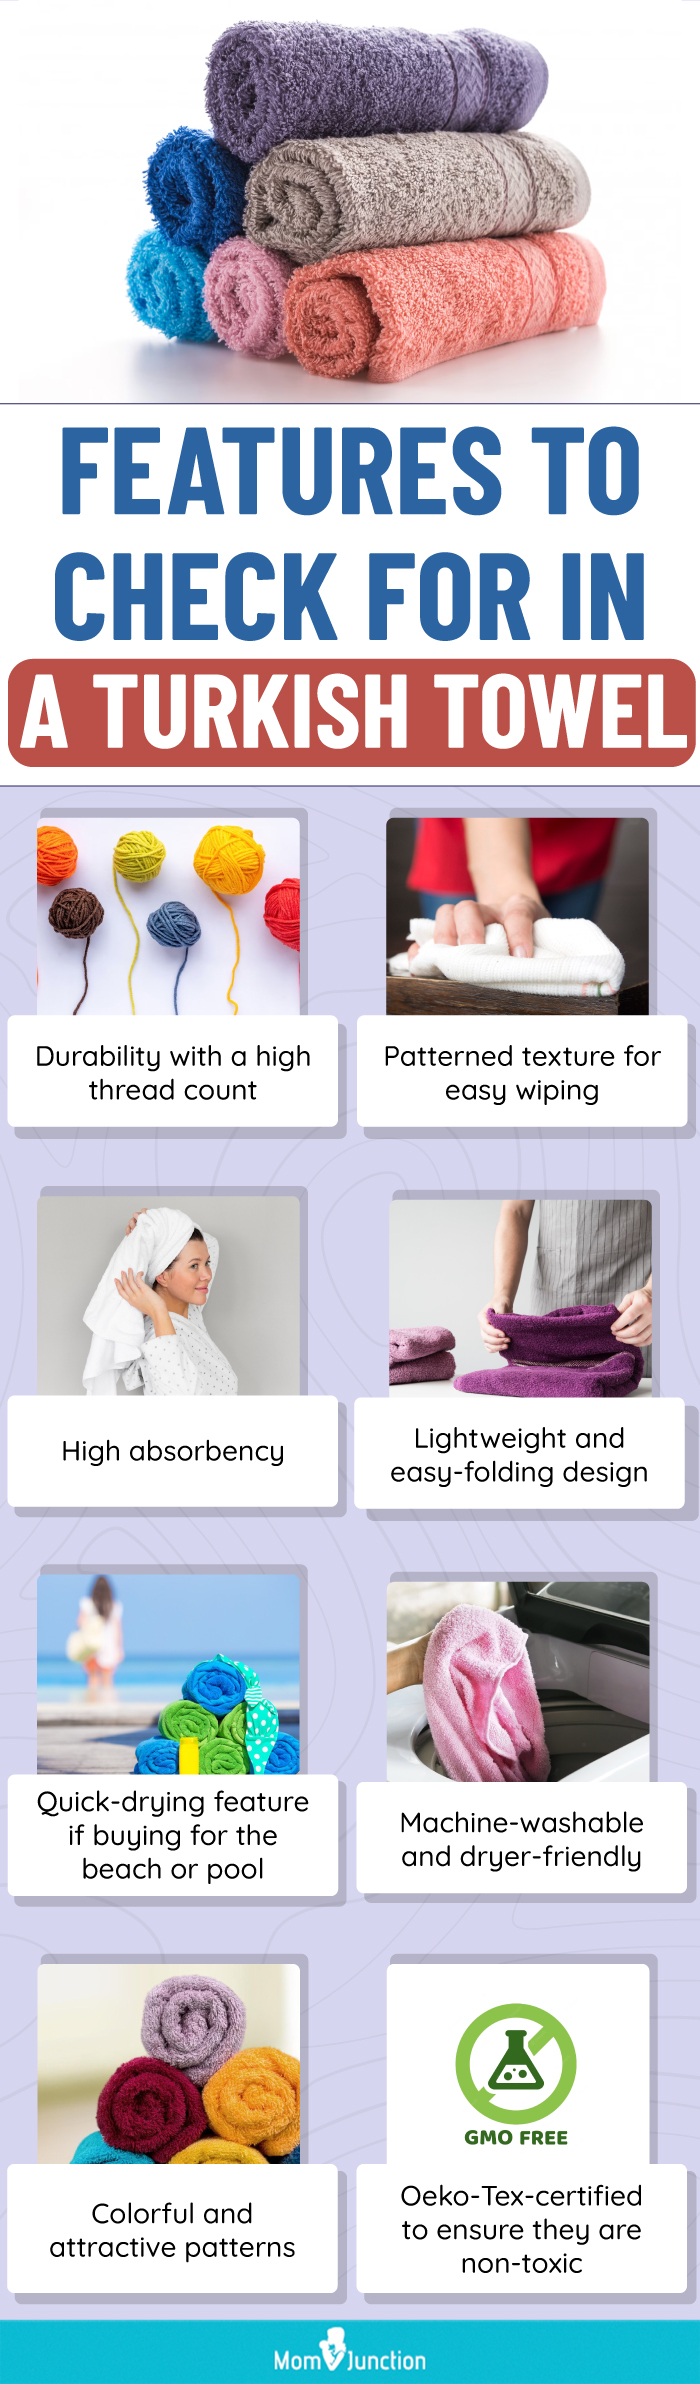 Features To Check For In A Turkish Towel (infographic)